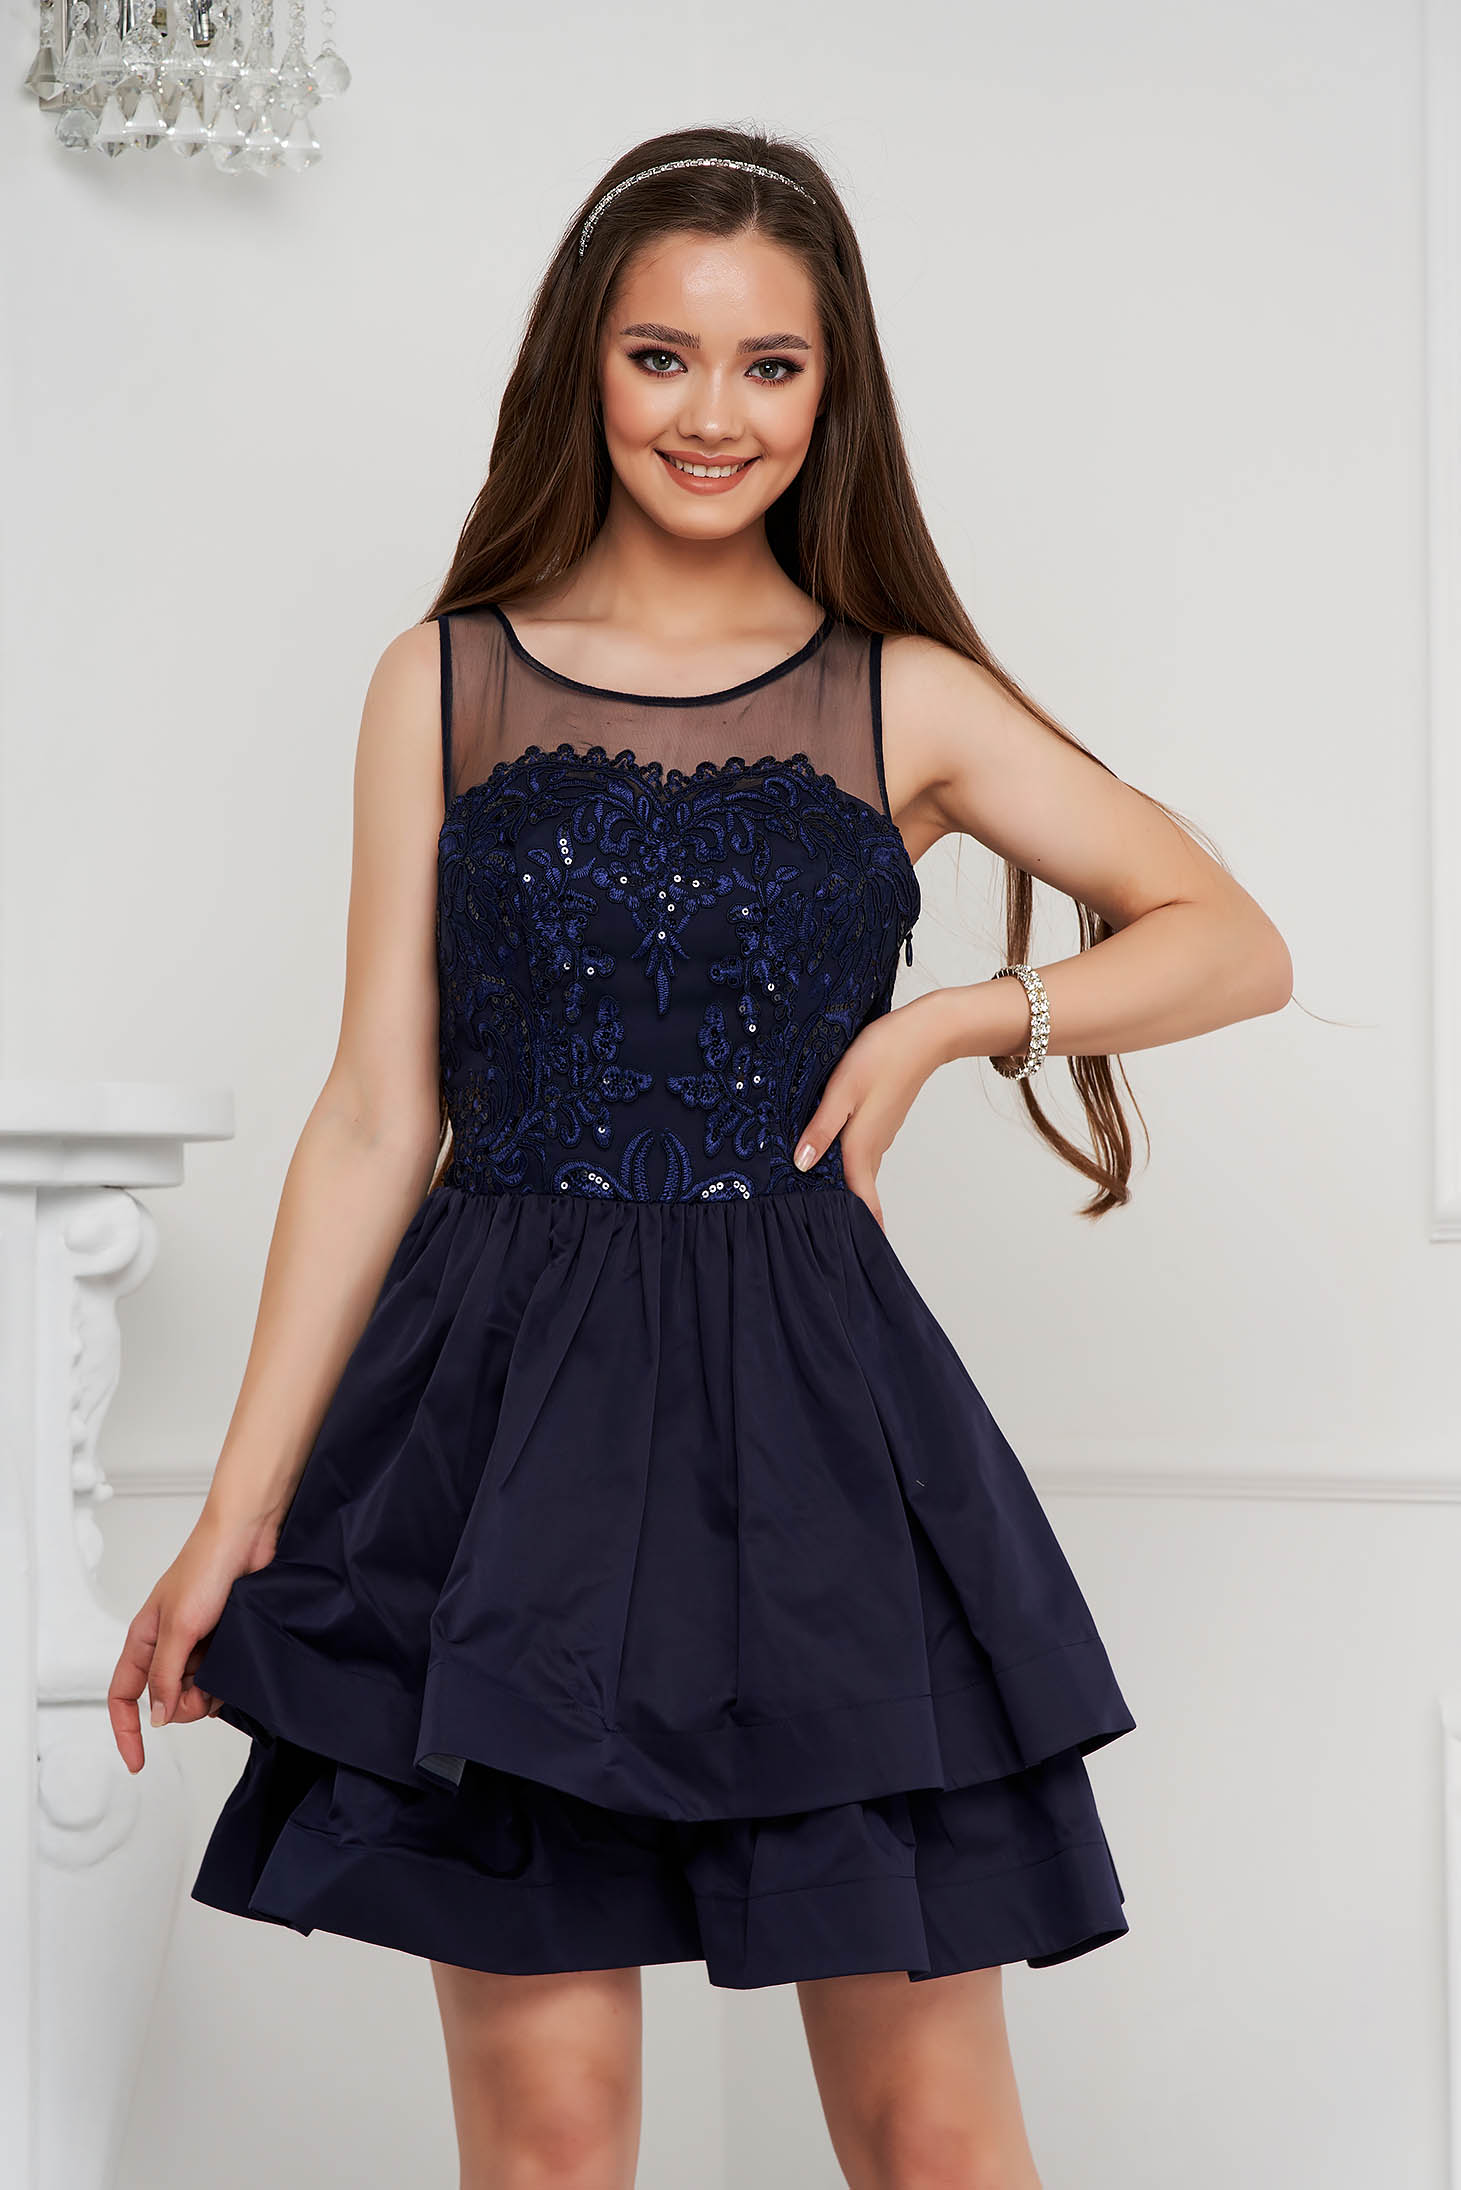 Darkblue dress short cut cloche from satin fabric texture with sequin embellished details